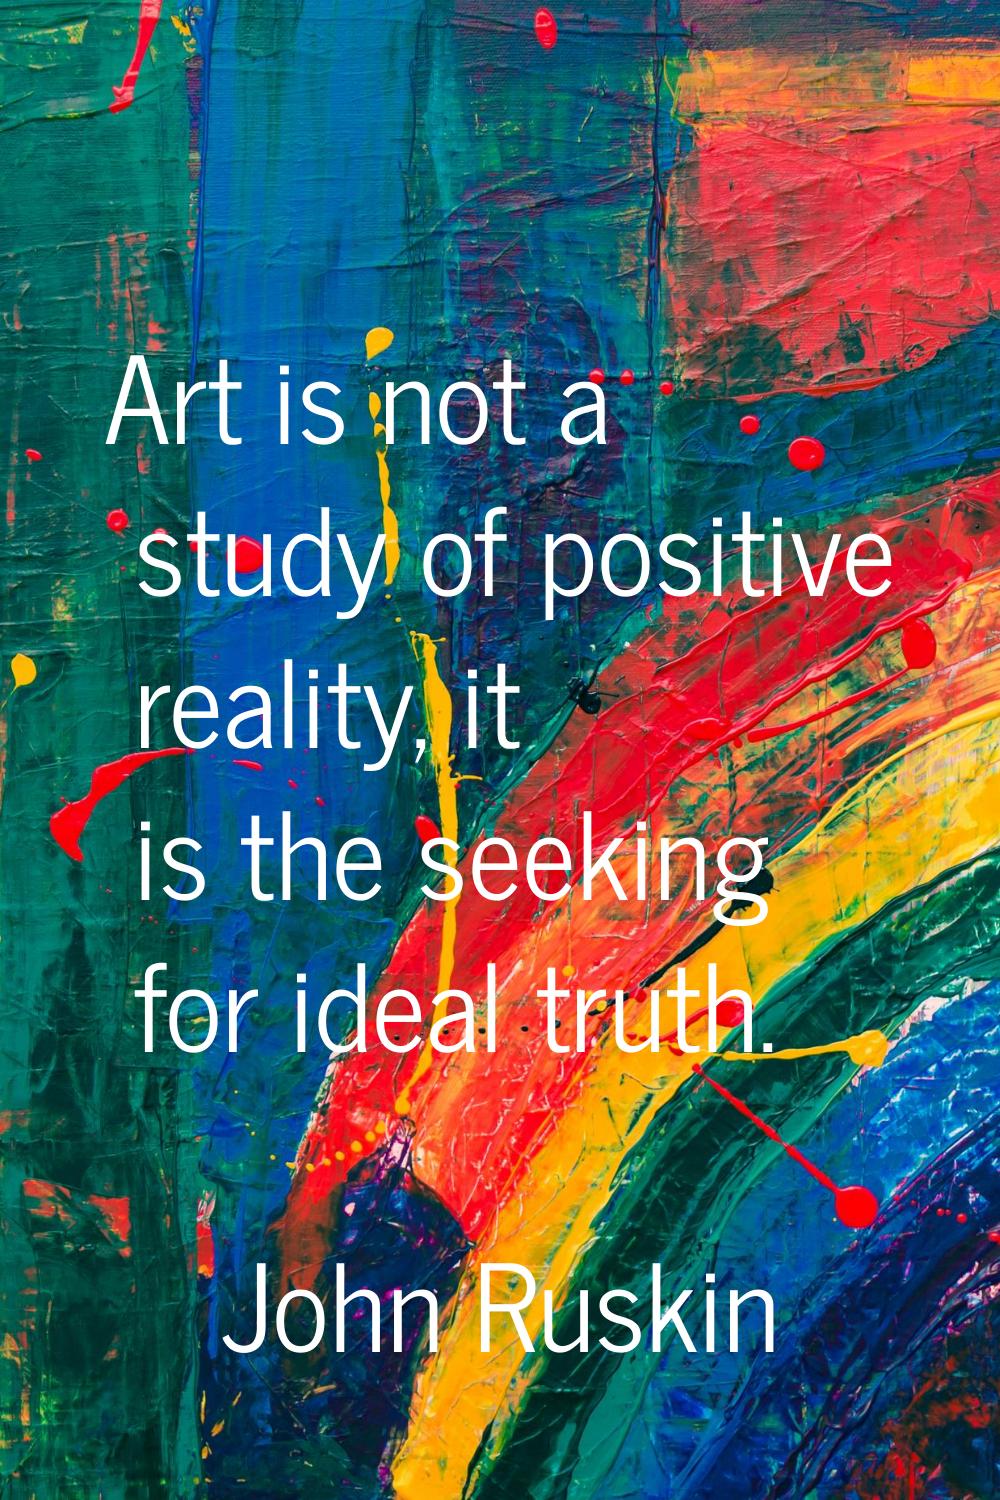 Art is not a study of positive reality, it is the seeking for ideal truth.